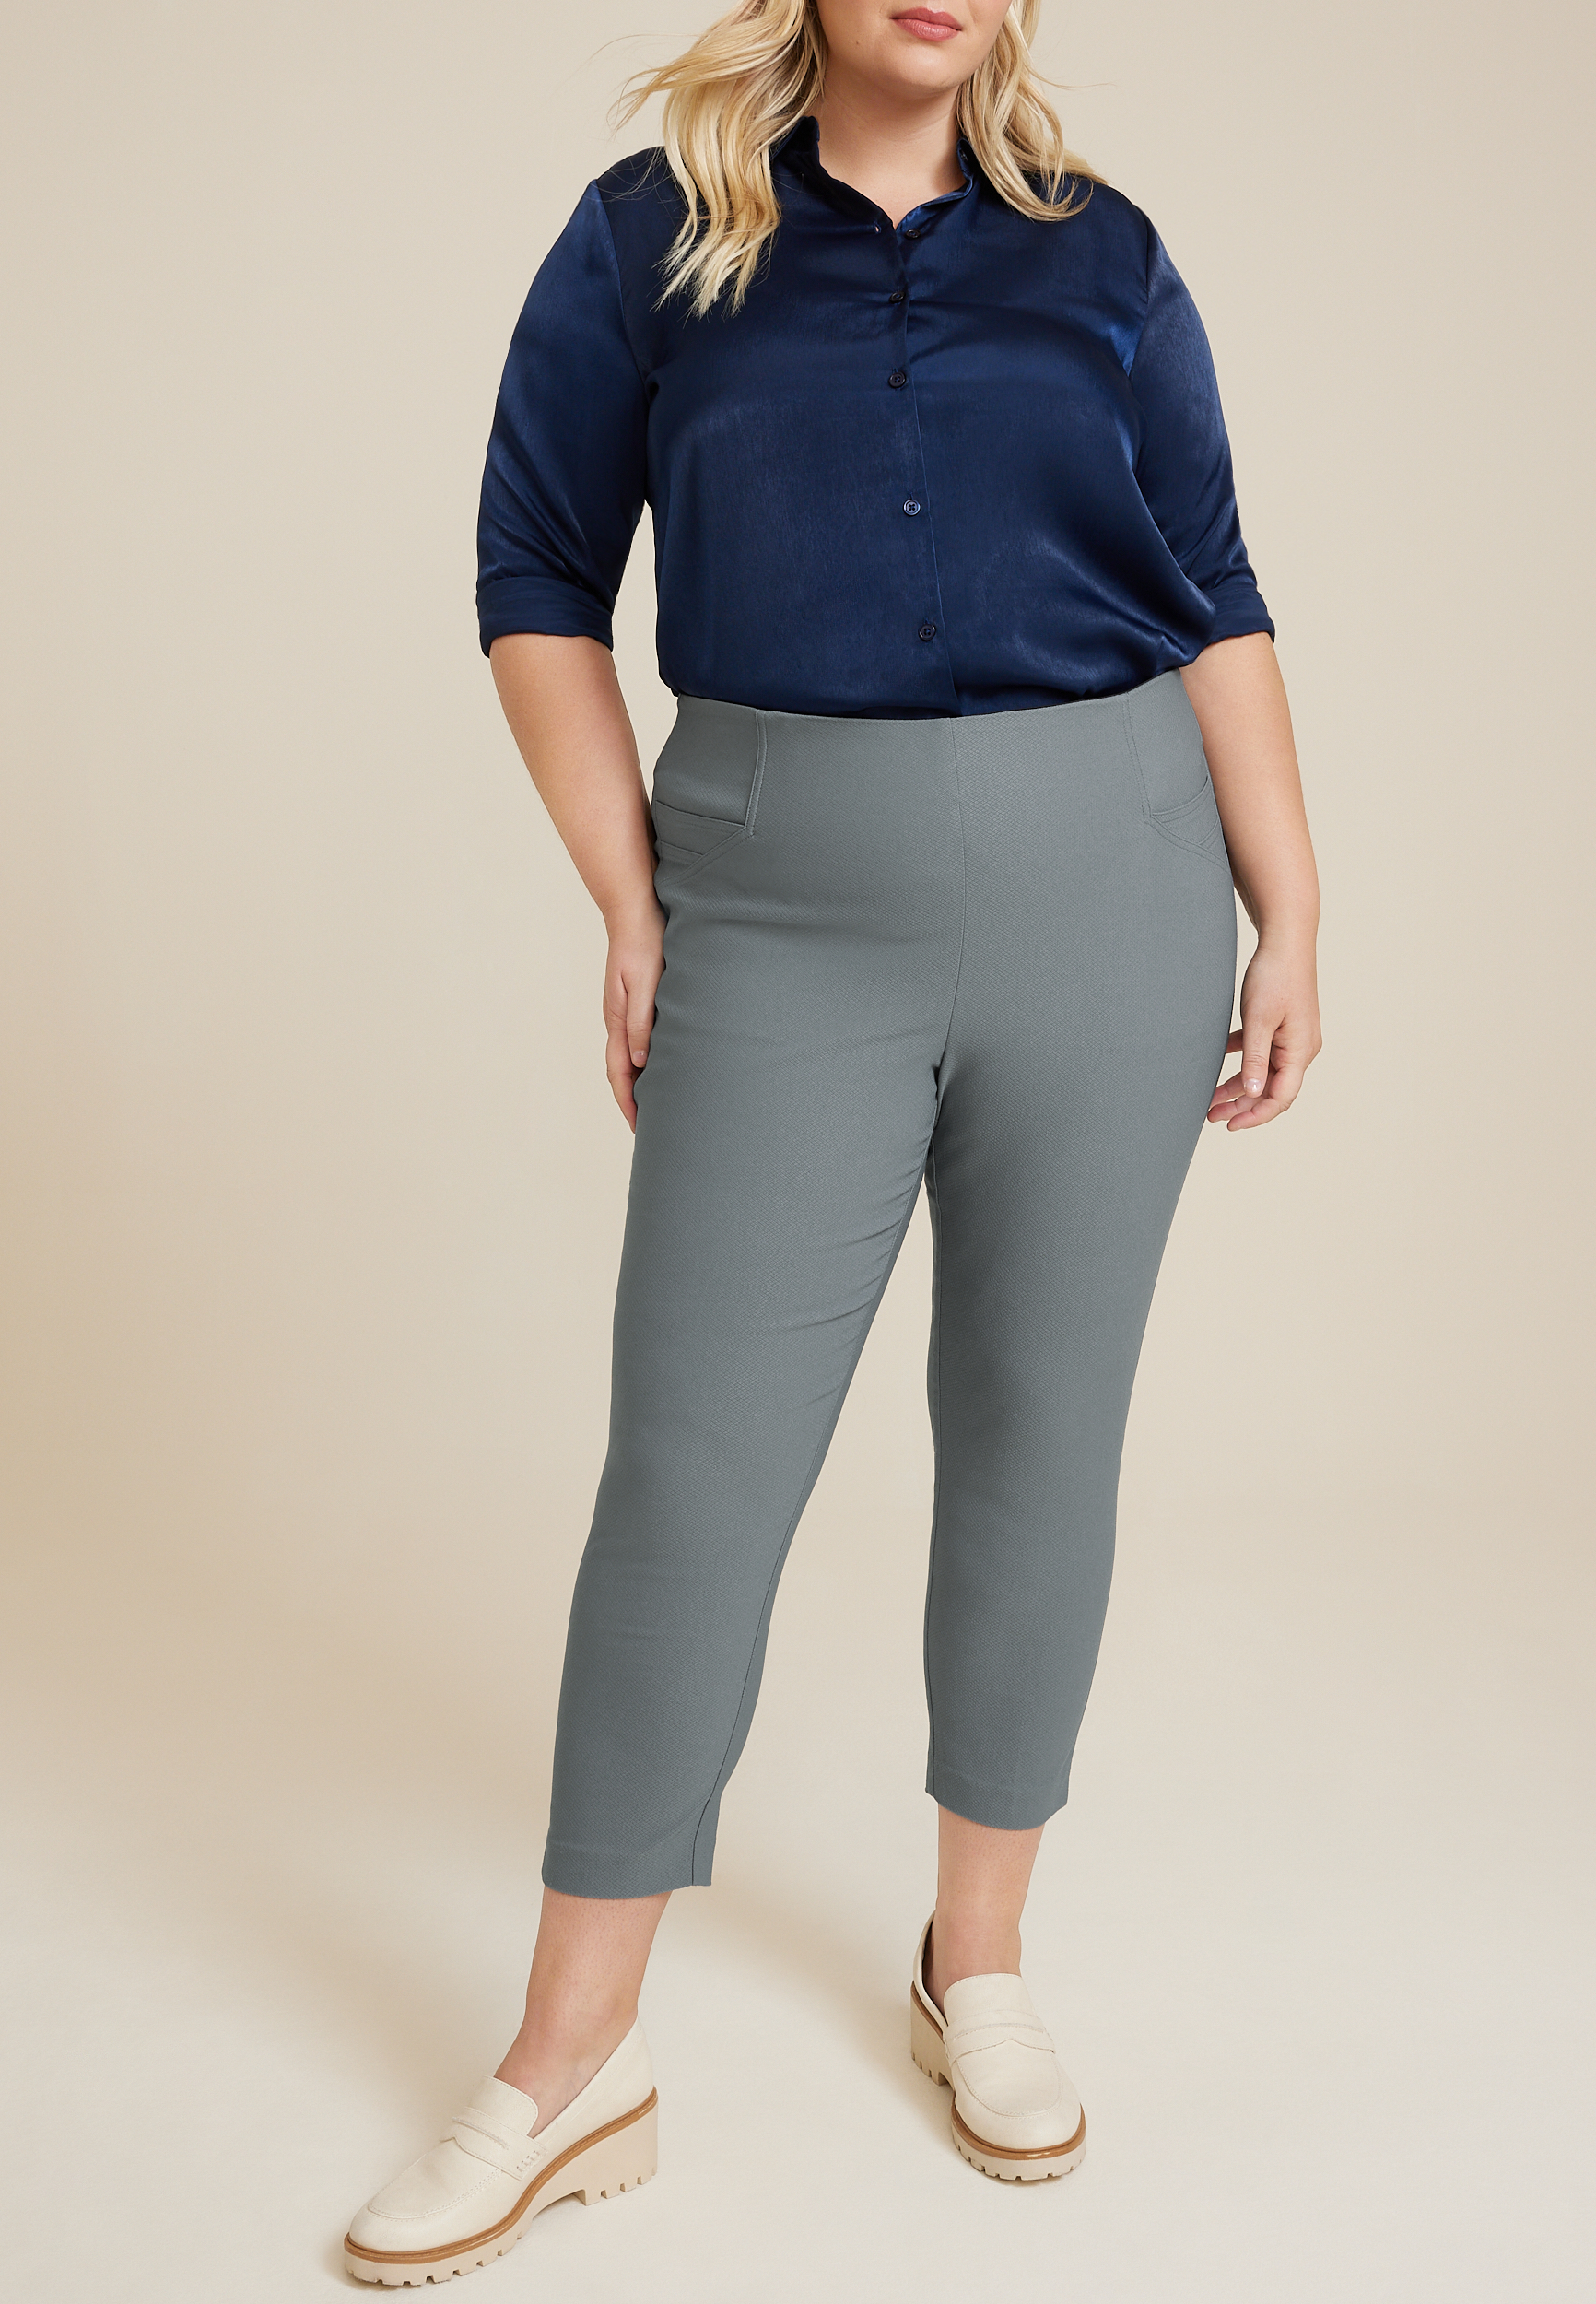 29 of the Best Business Clothes for Plus Size Women